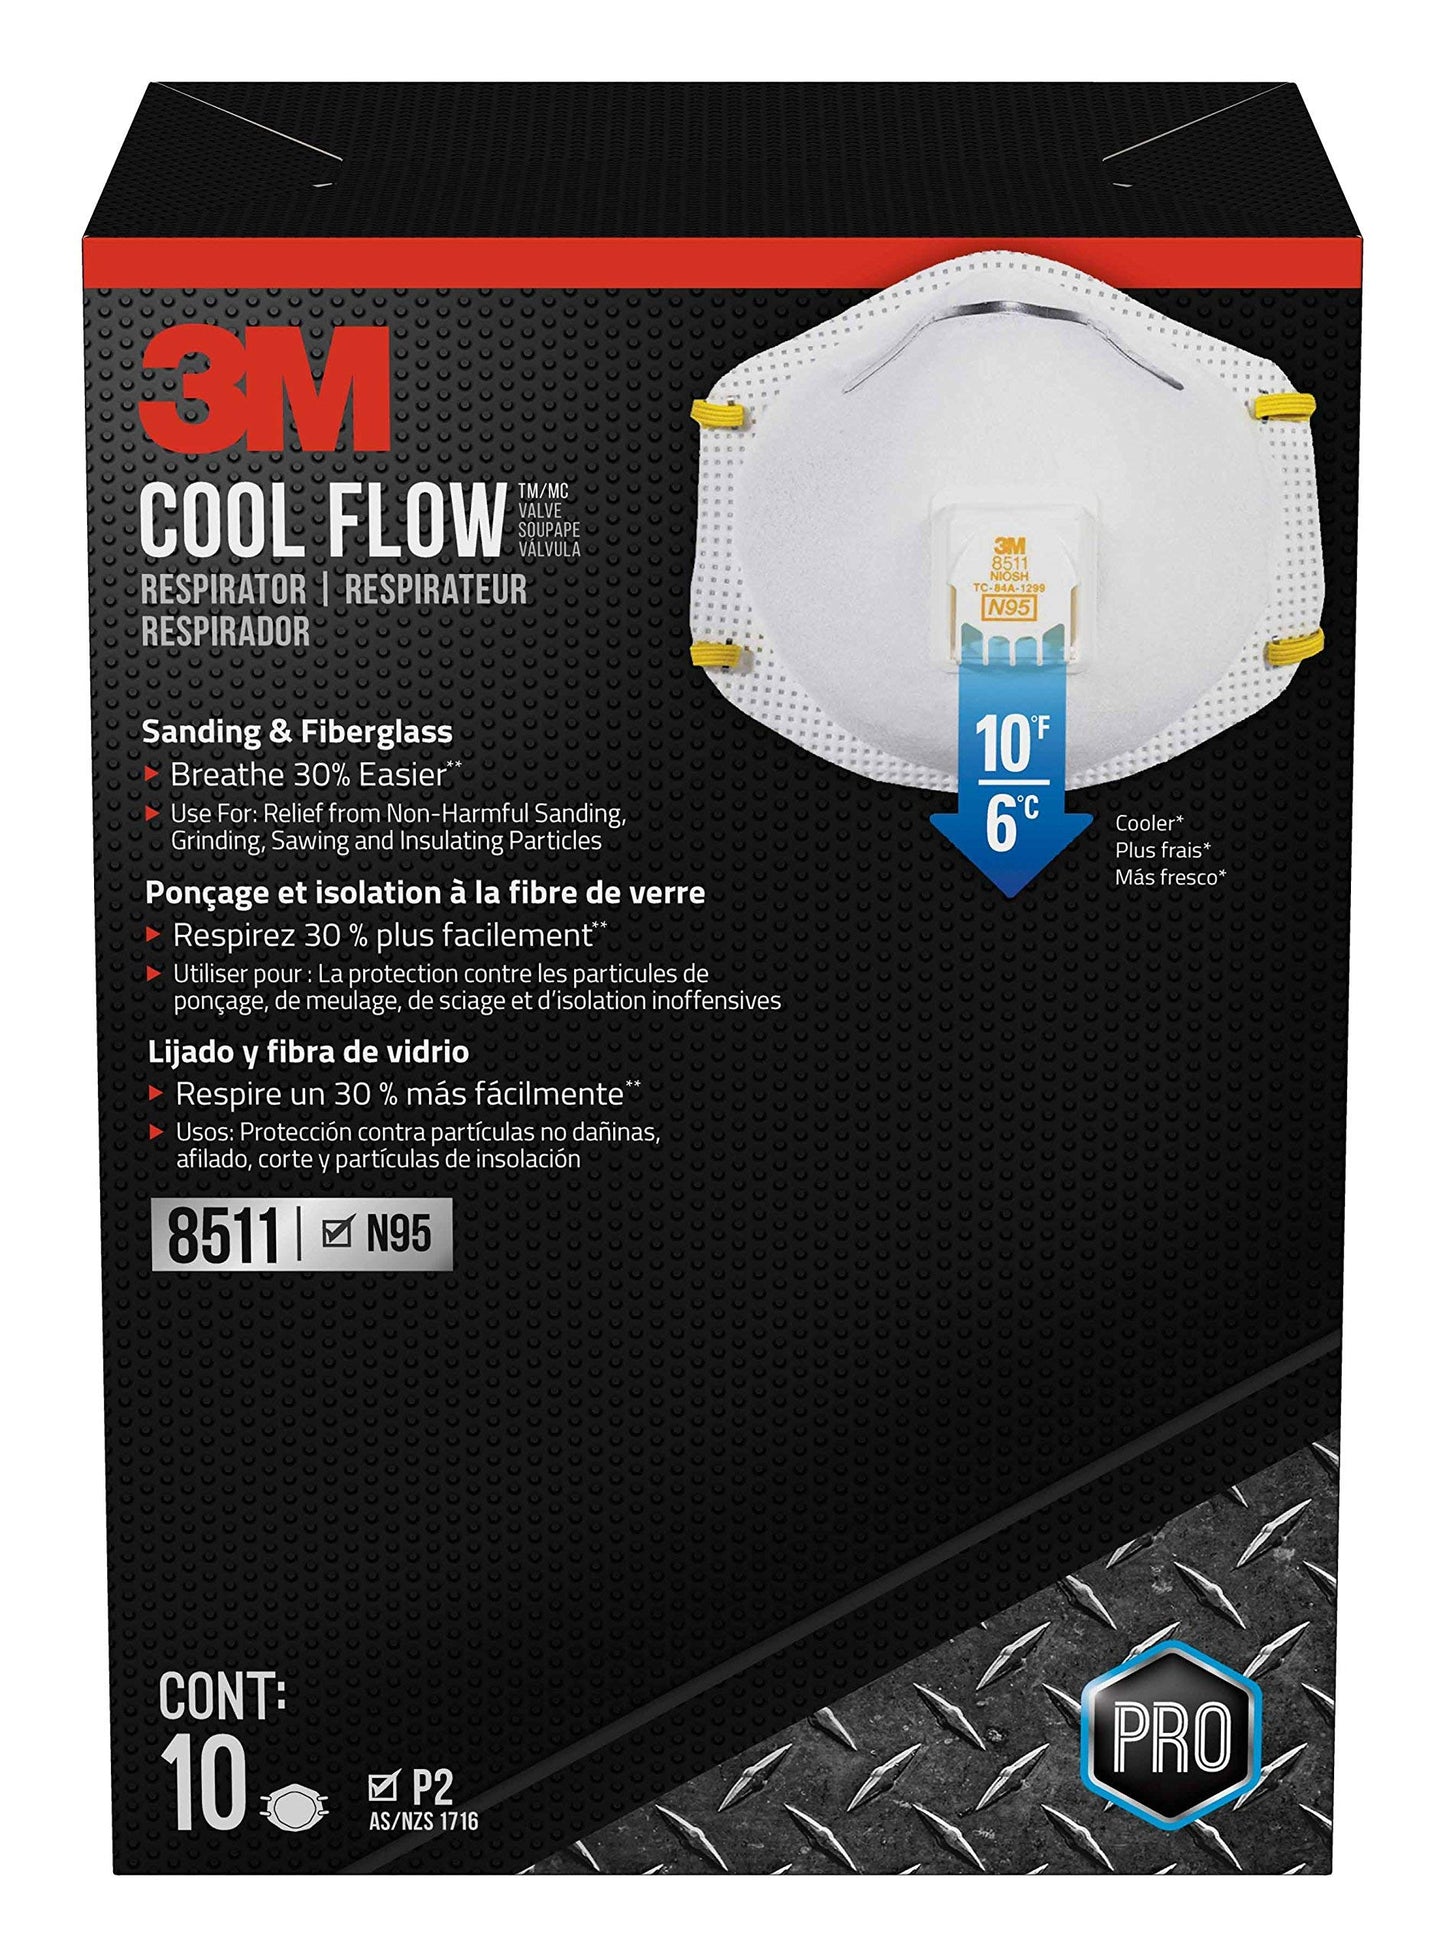 3M All-In-One Respirator, Best for Sanding, Fiberglass, Drywall, Painting, N95, Exhalation Valve Helps Direct Exhaled Air Downward, Relief From Dusts